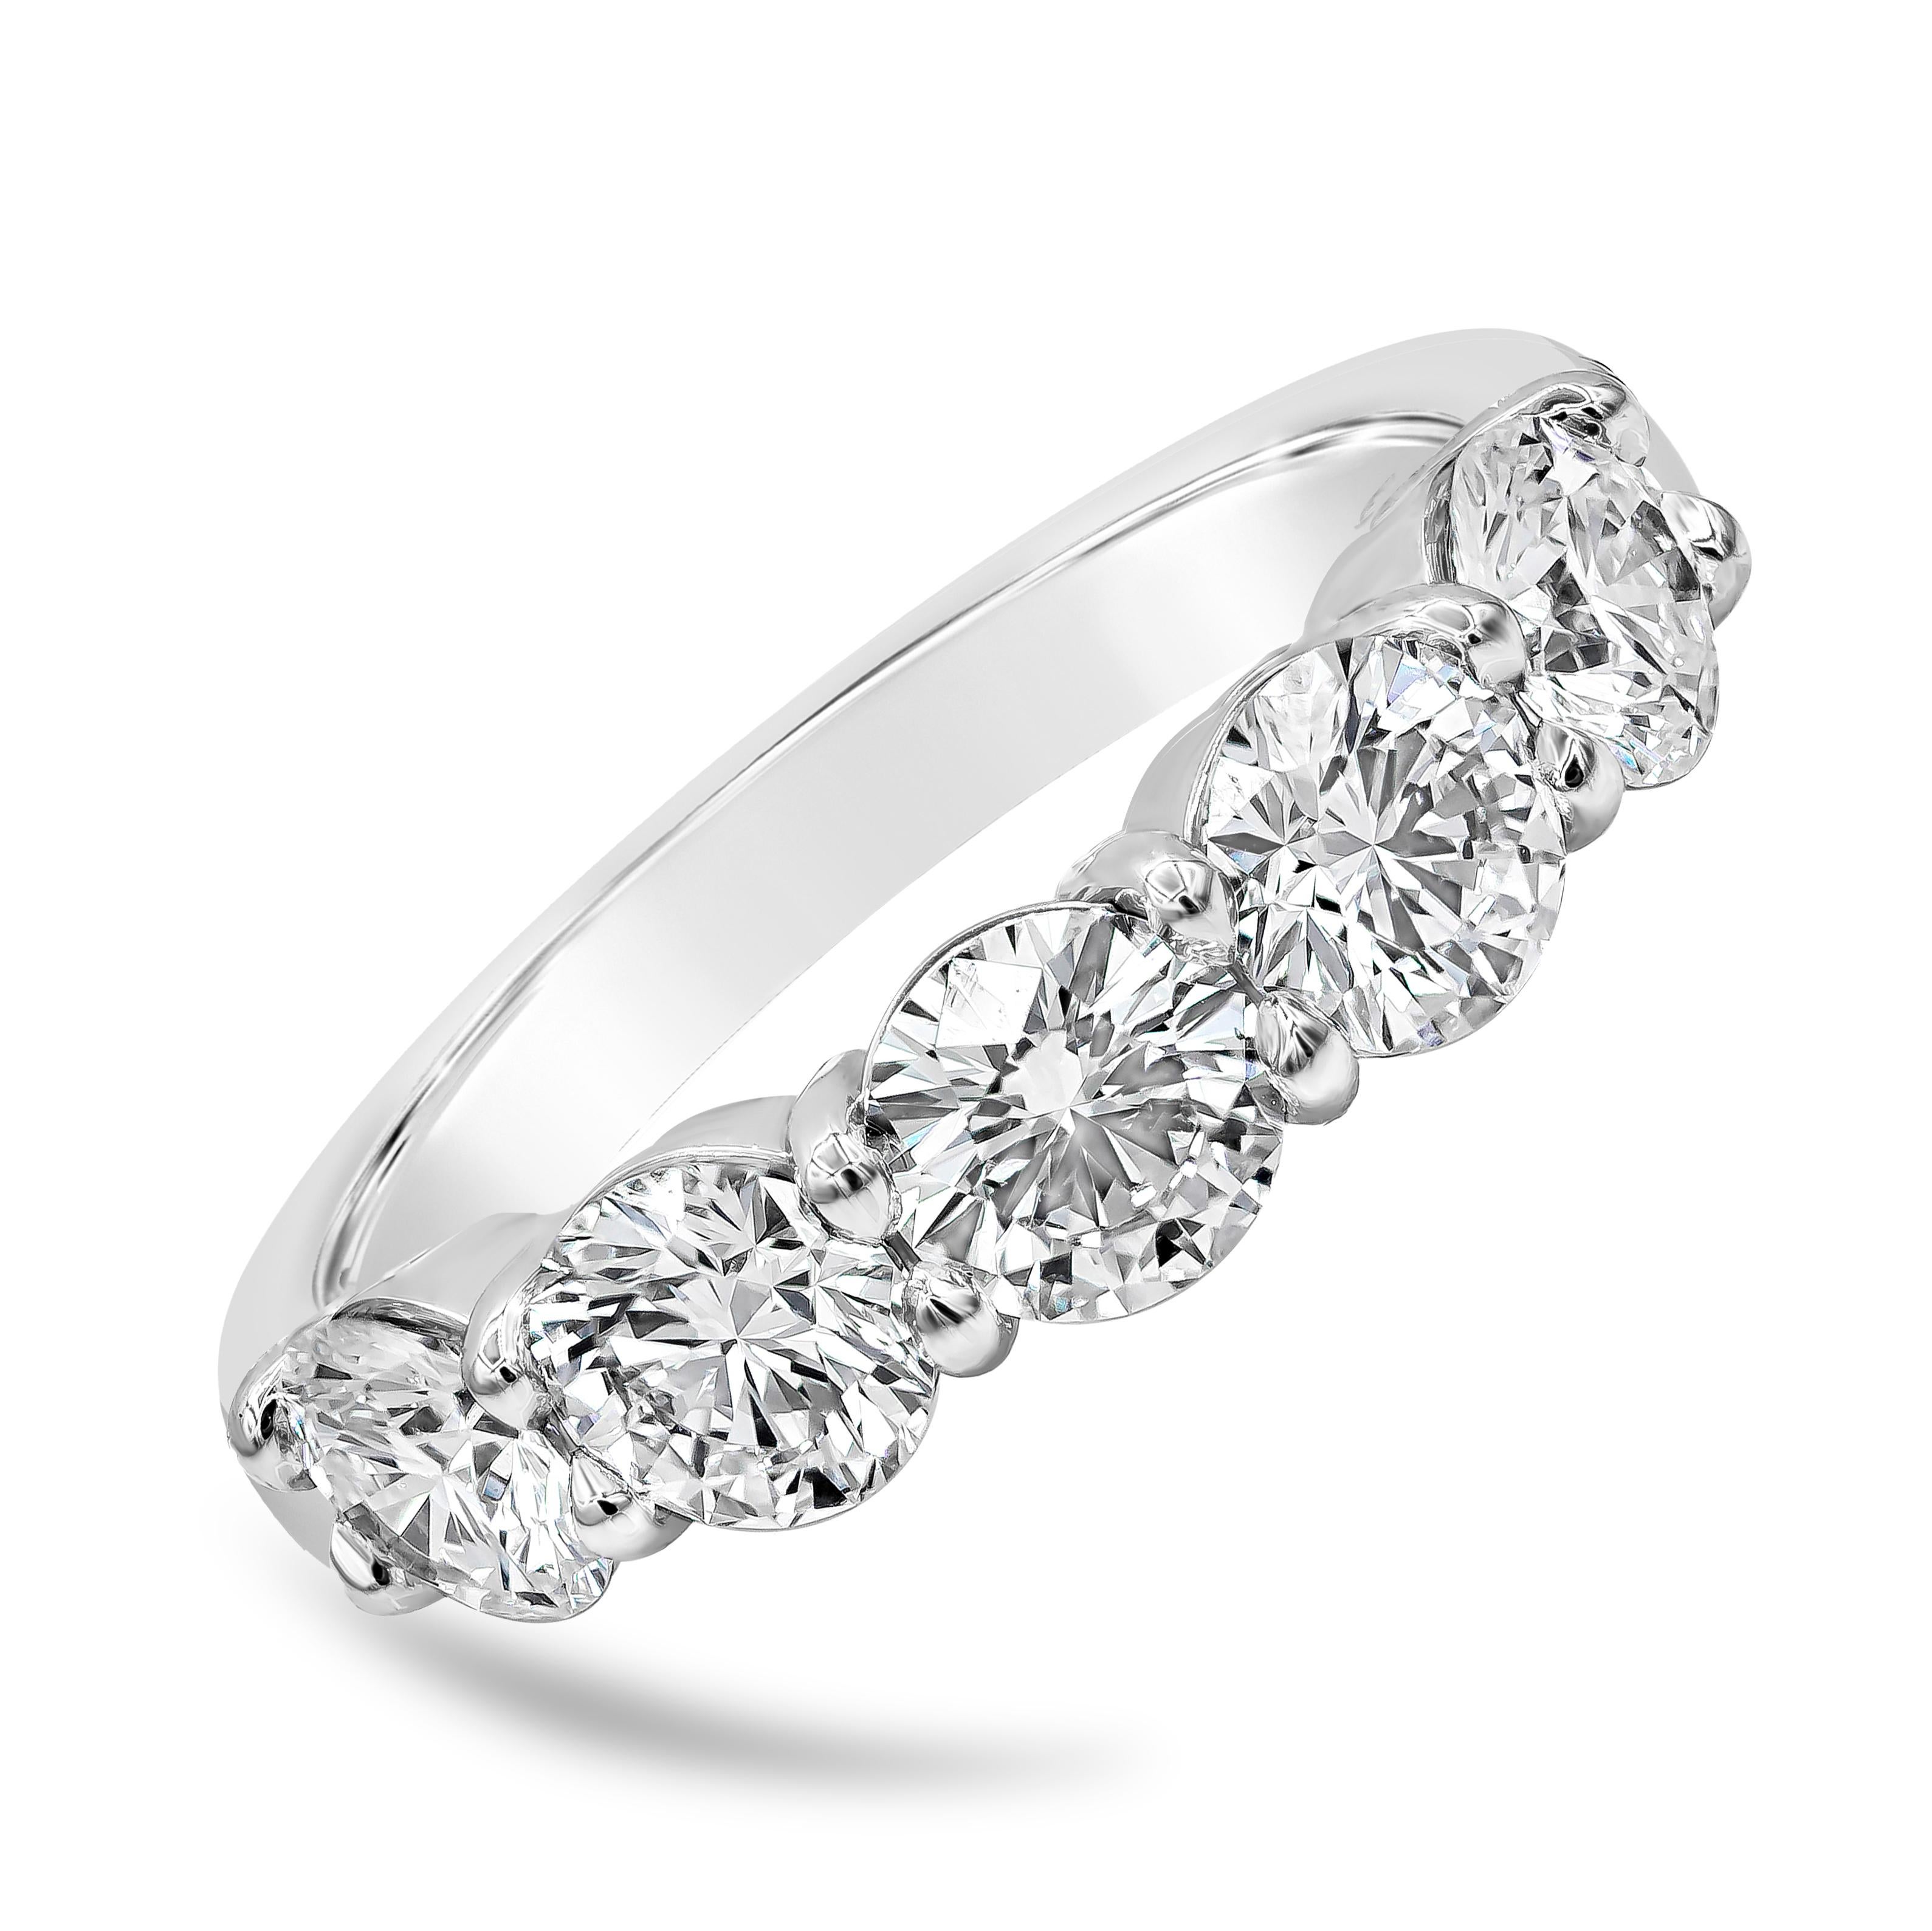 A classic wedding band style showcasing five stones of round brilliant diamonds weighing 2.58 carats total, F Color and VS in Clarity. Set in a timeless shared-prong setting, Finely made in platinum. Size 7 US resizable upon request.

Style